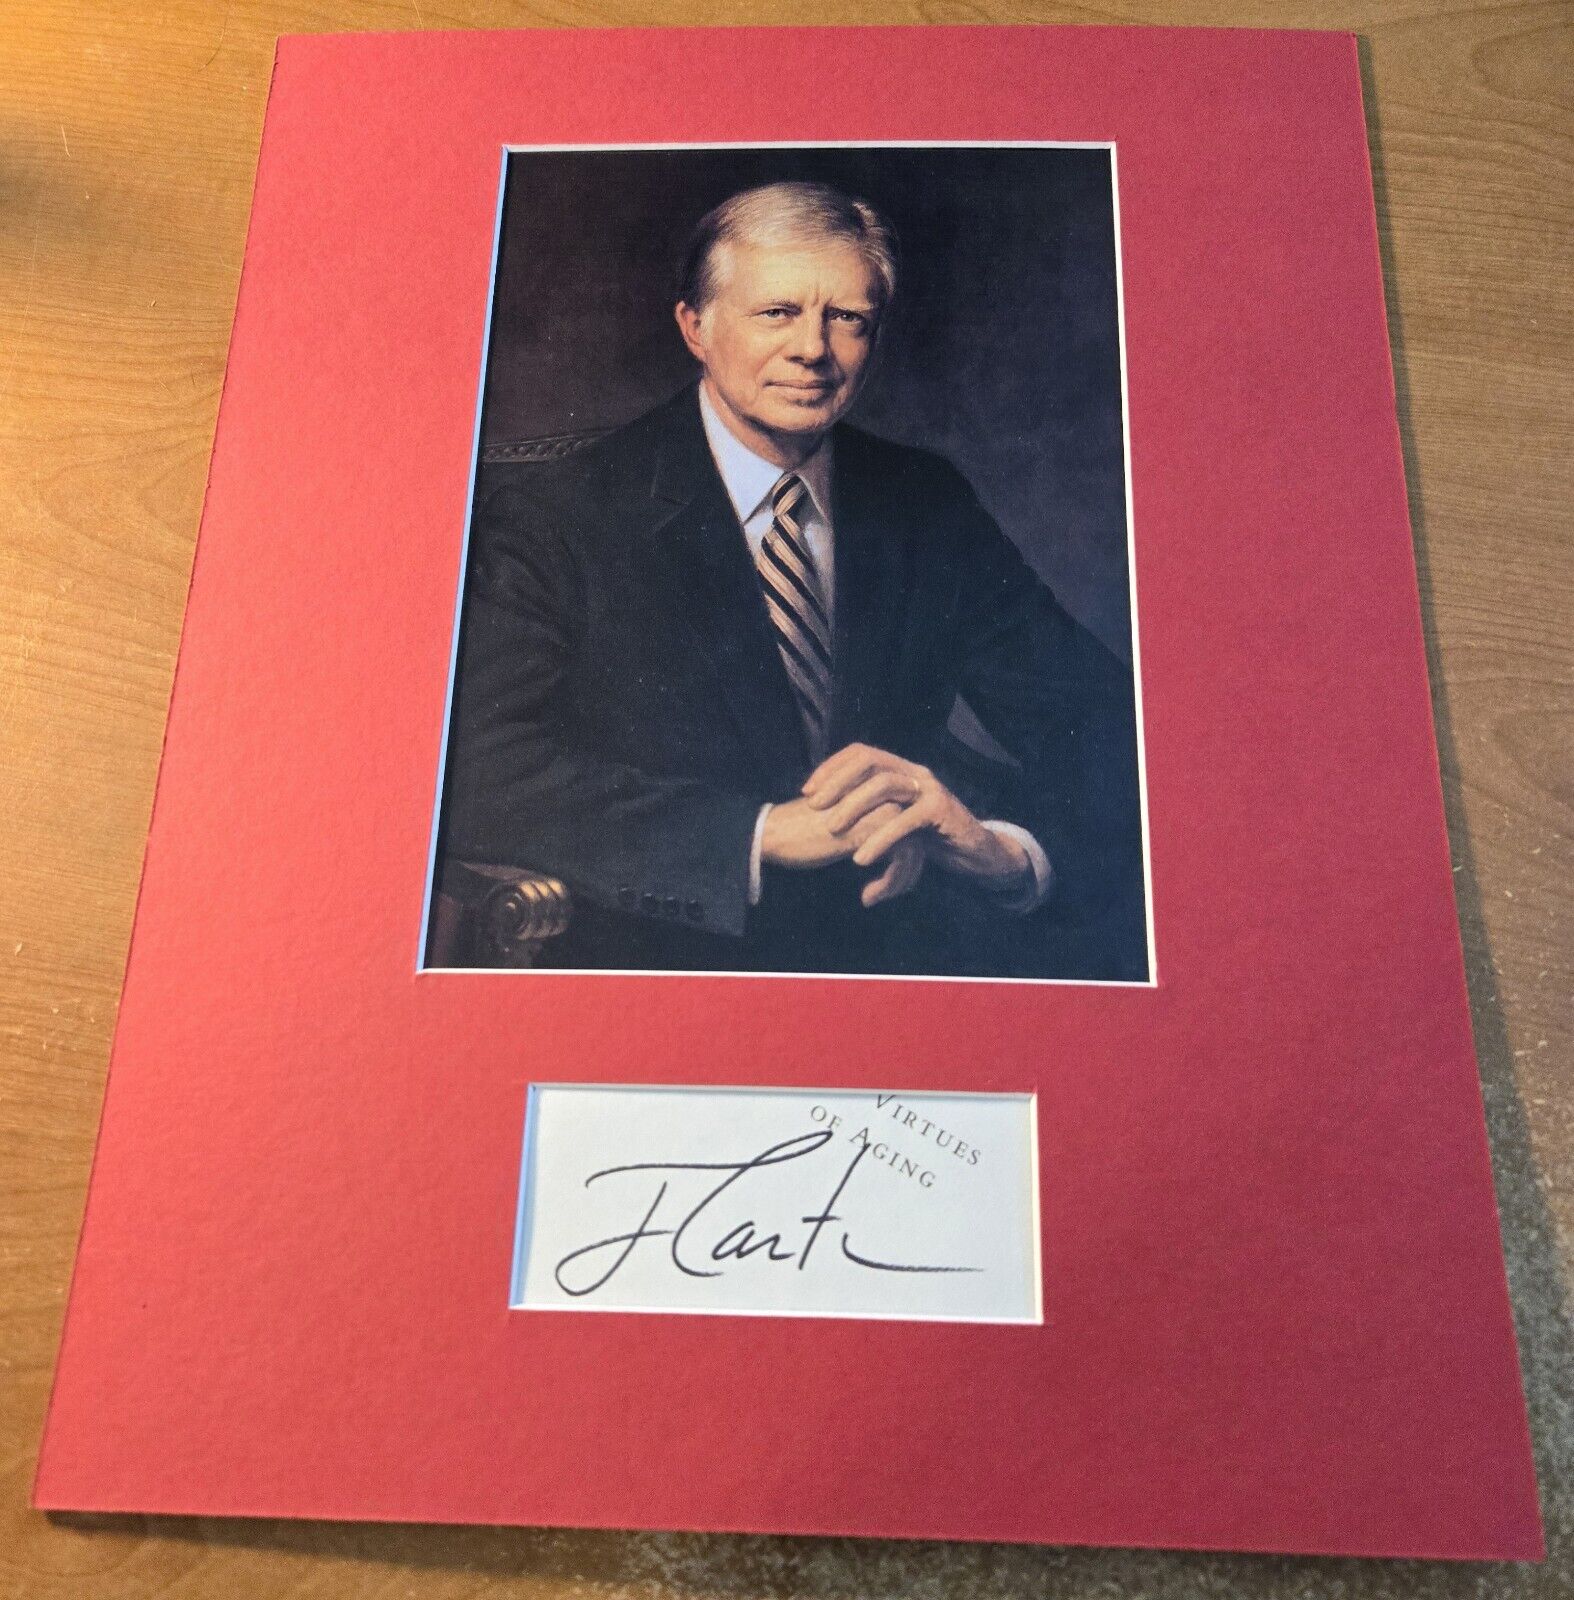 President Jimmy Carter Authentic Hand Signed Autograph w/Photo Display - Matted